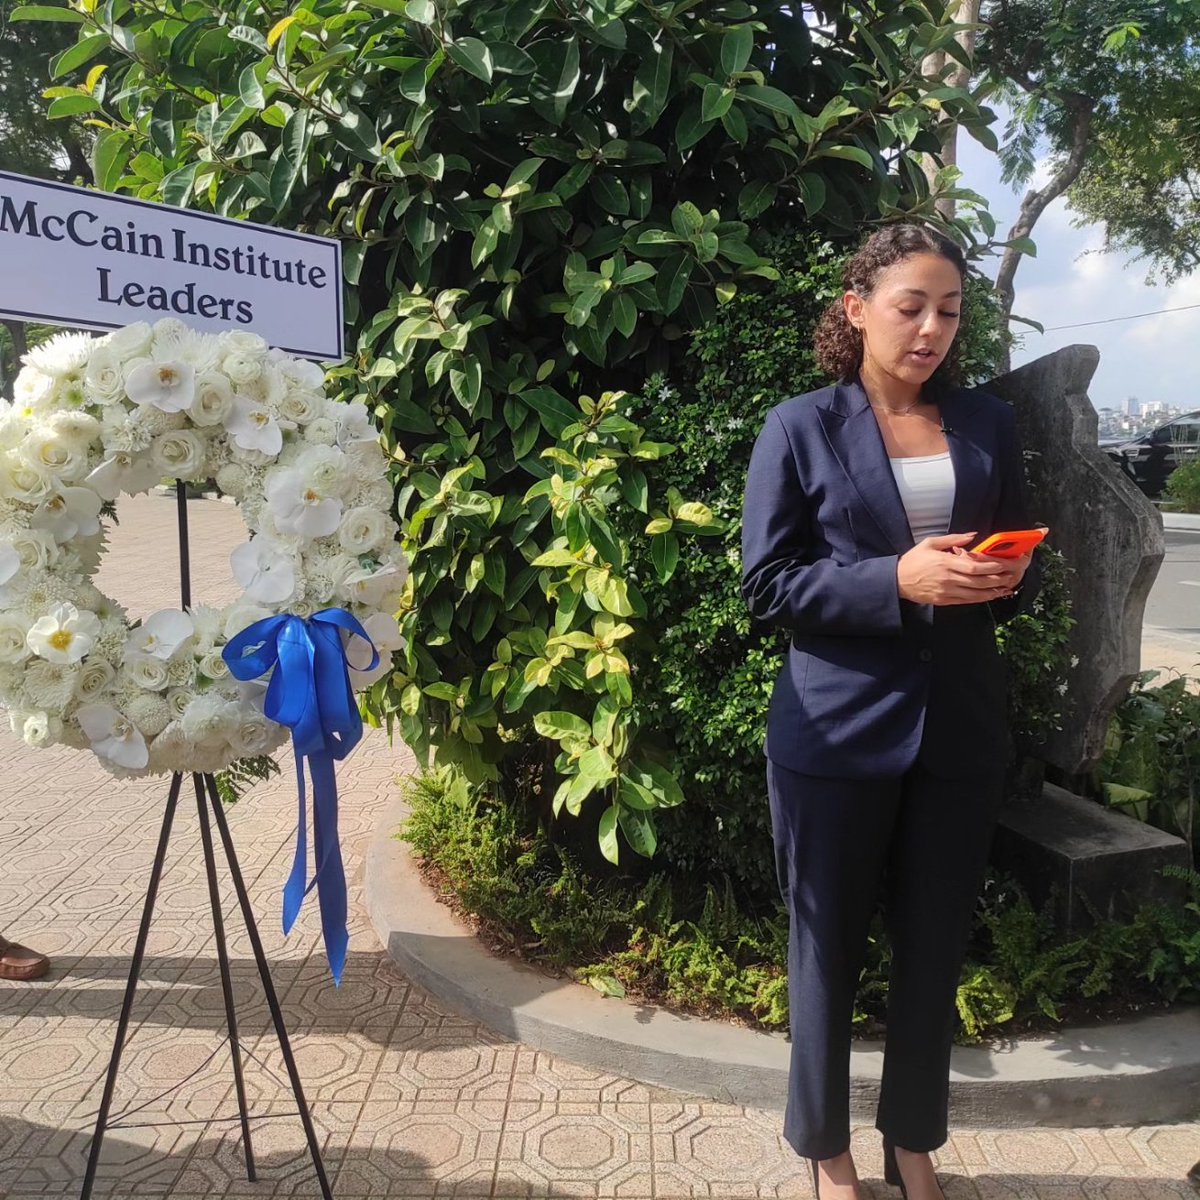 A moment of reflection at the John McCain memorial at Truc Bach Lake. Thank you, @McCainInstitute for making this possible.
#MGLinVietnam 
#McCainGlobalLeaders